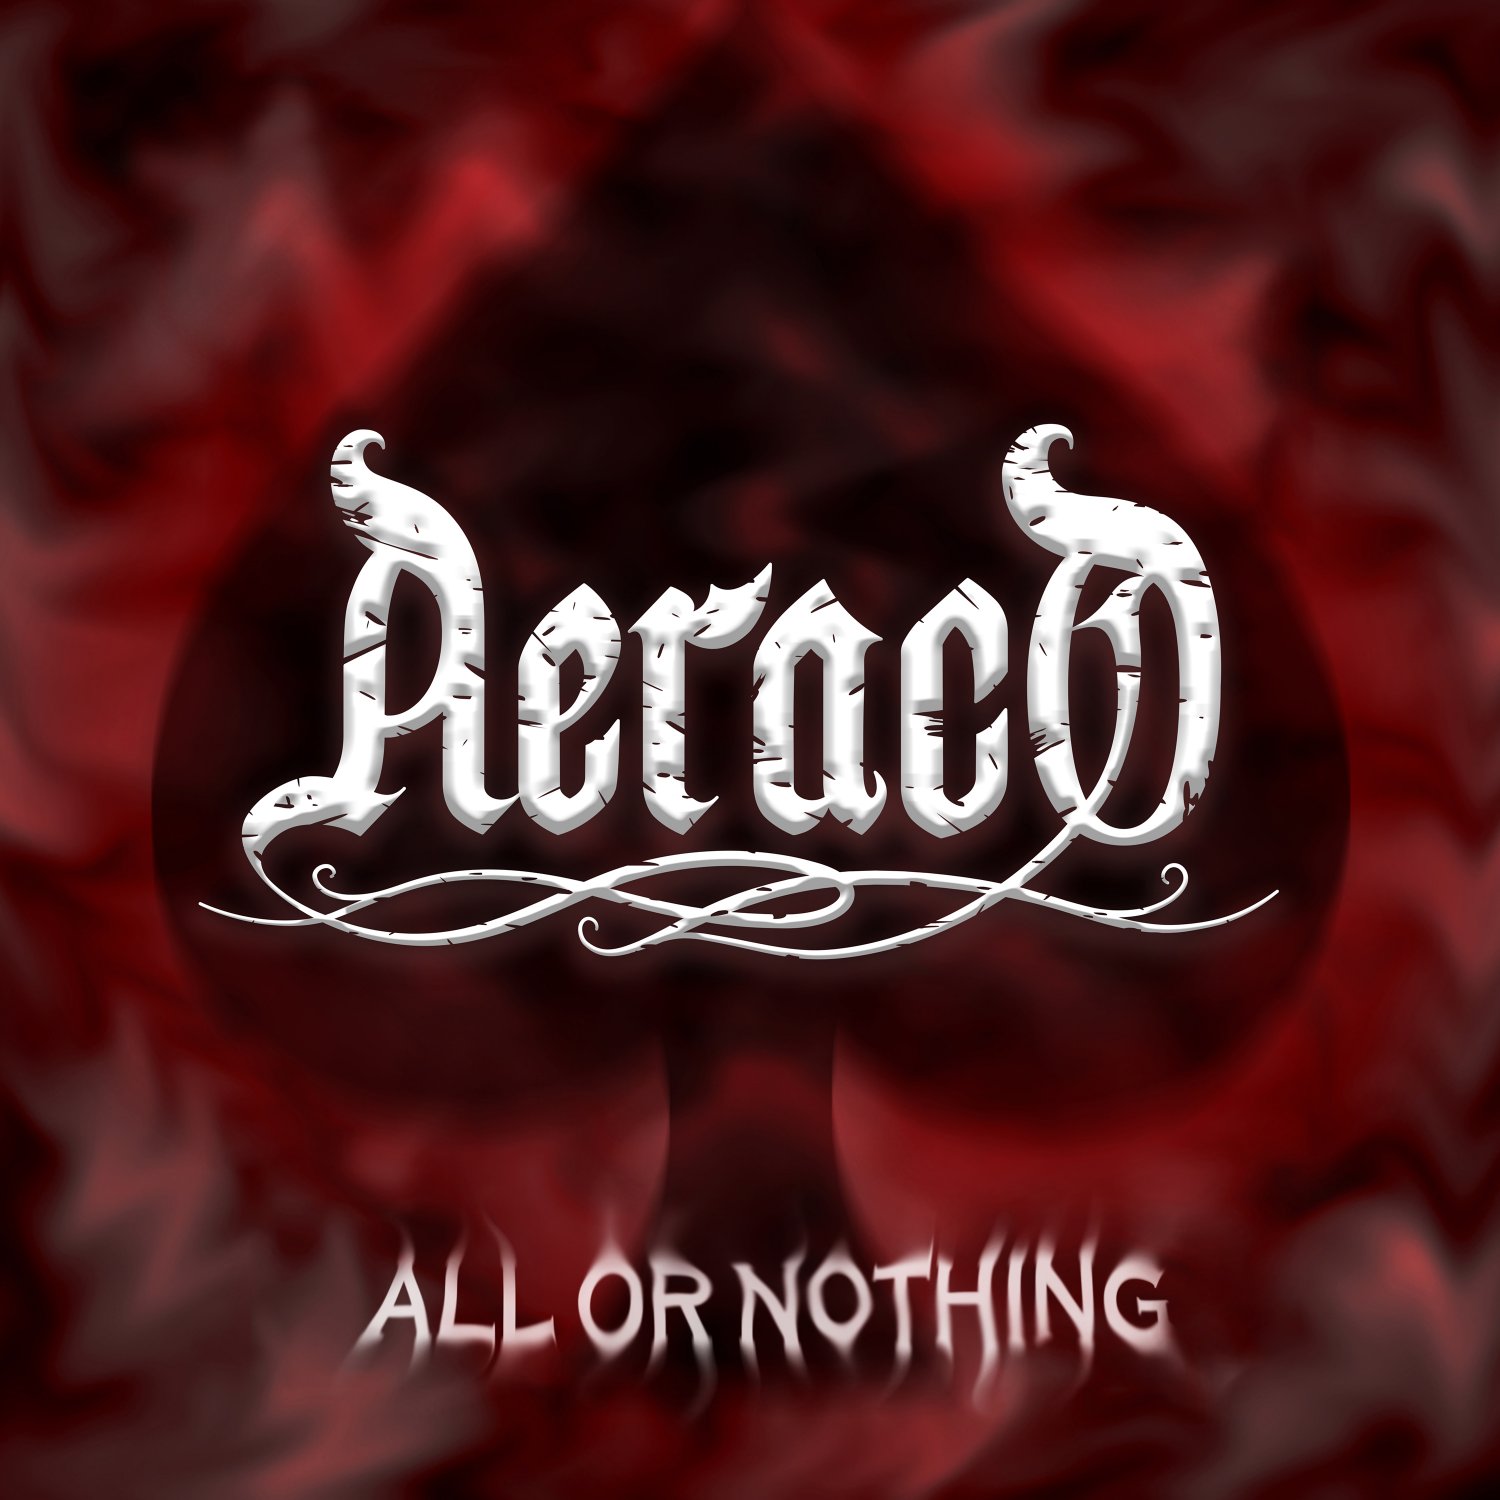 All or Nothing by Aeraco USB Wristband